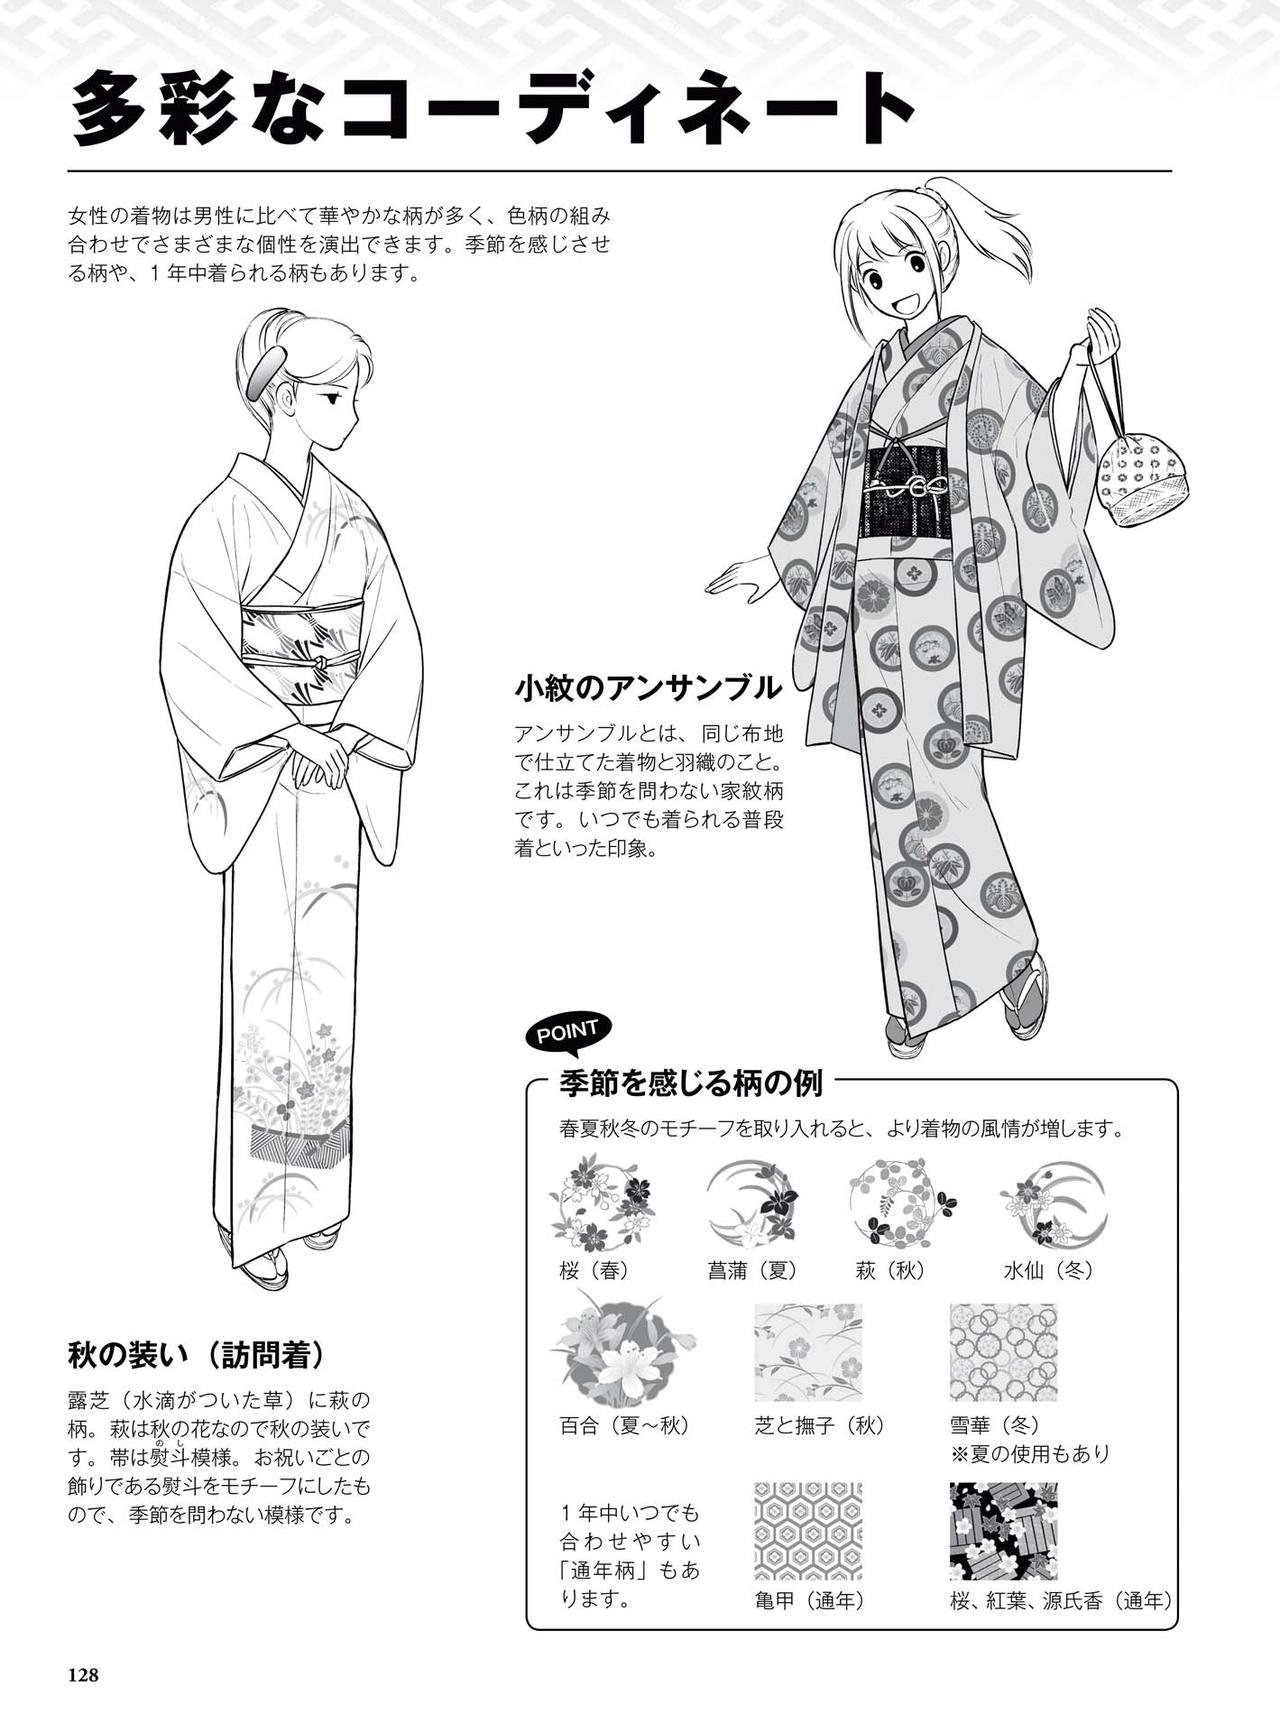 How to draw a kimono: From the basics to the point to advanced 129